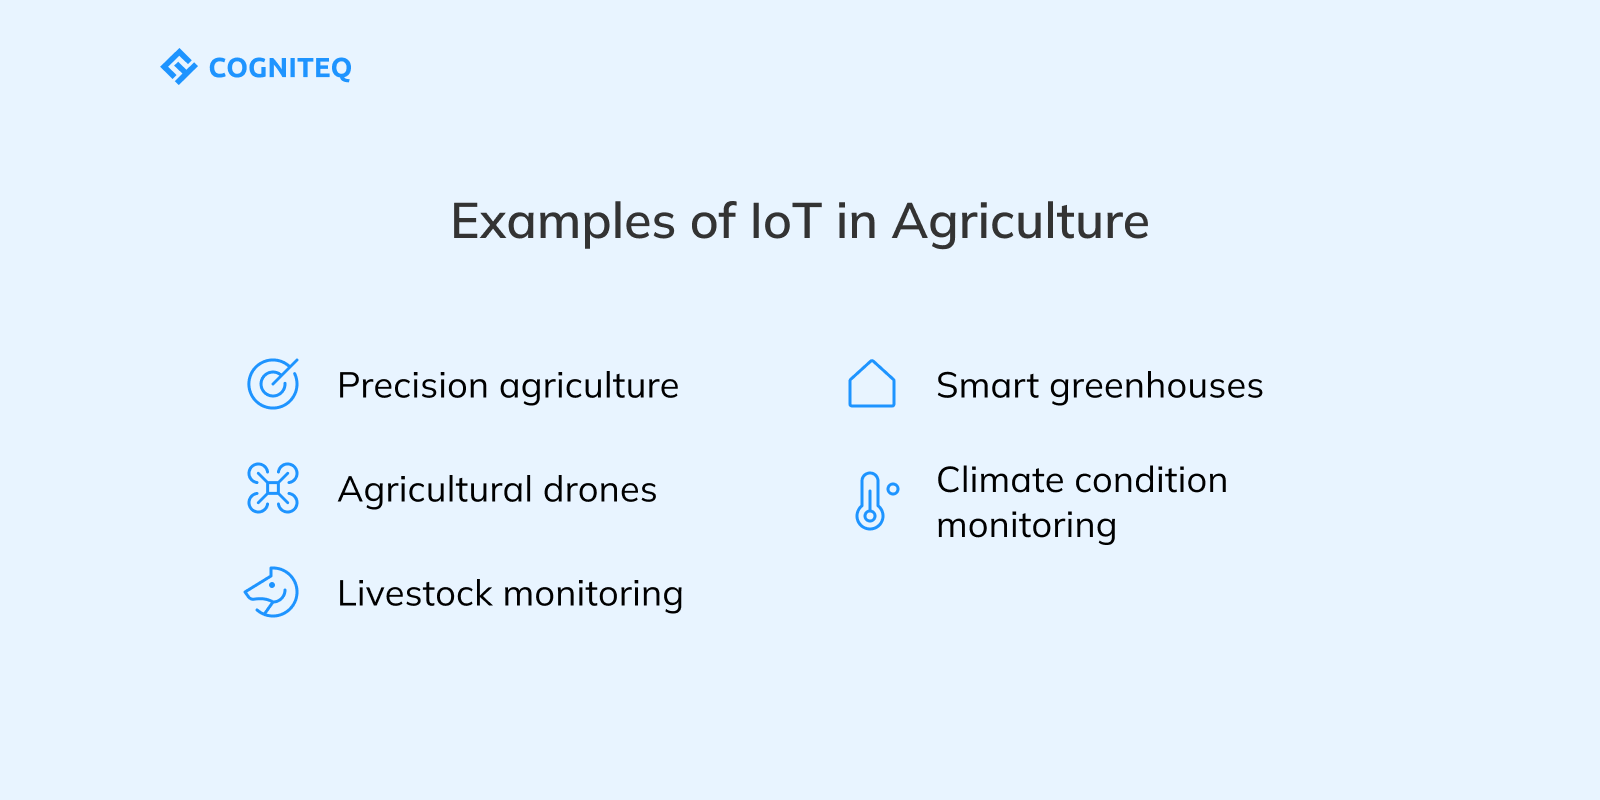 Applications of IoT in agriculture